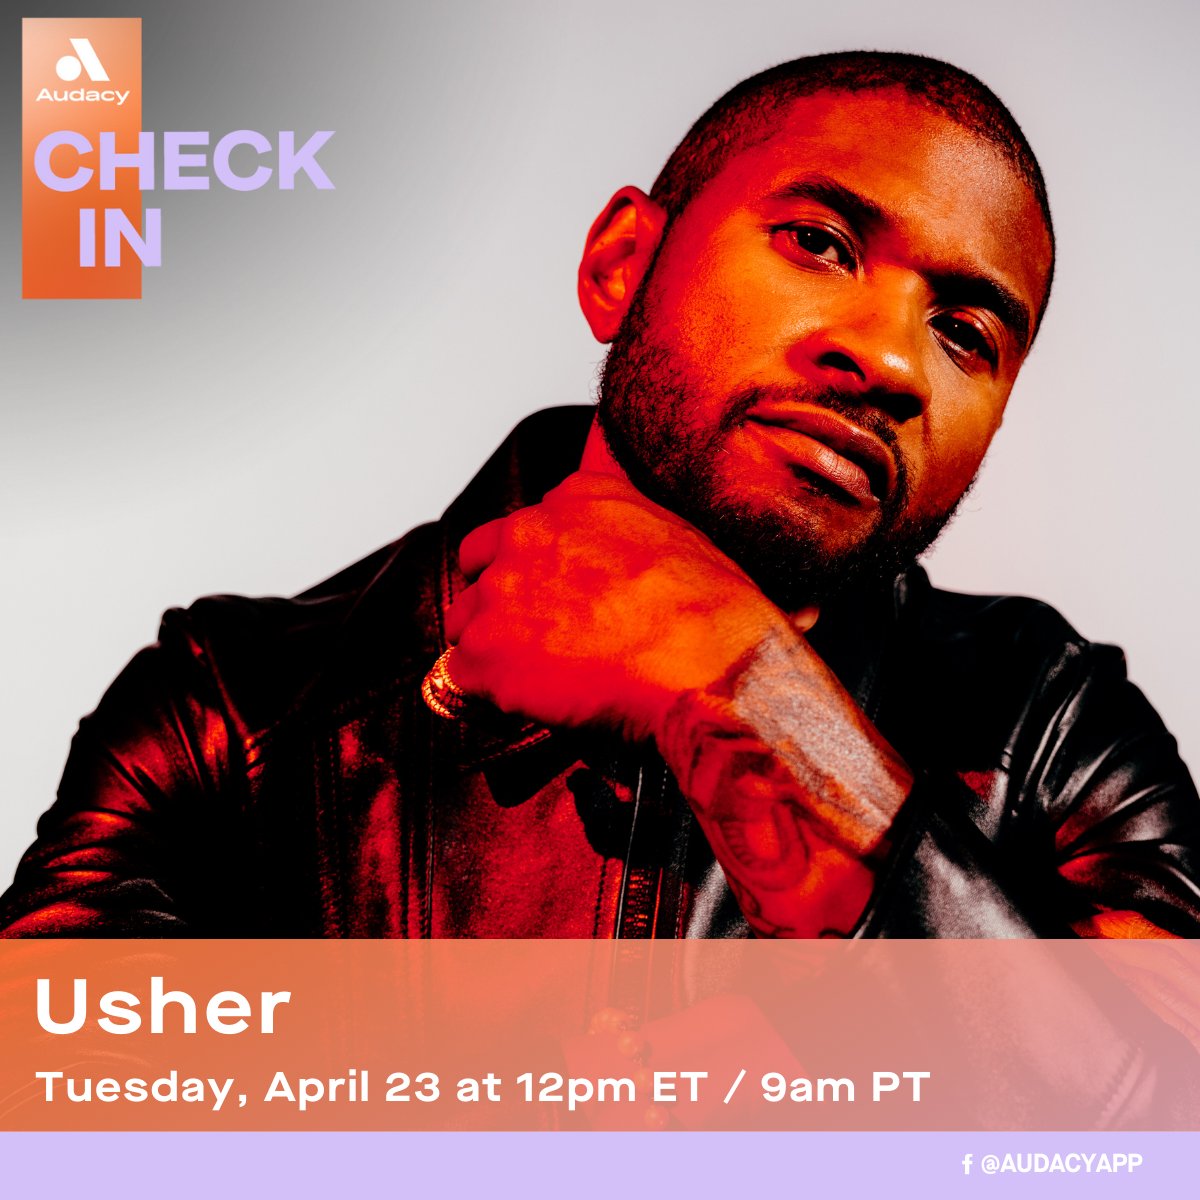 Get excited because @Usher is 'COMING HOME' to #AudacyCheckIn to chat with Greg Street about his new album + tour 🔥

Tune in Tues, 4/23 at 12PM ET ➡️ auda.cy/UsherCheckIn